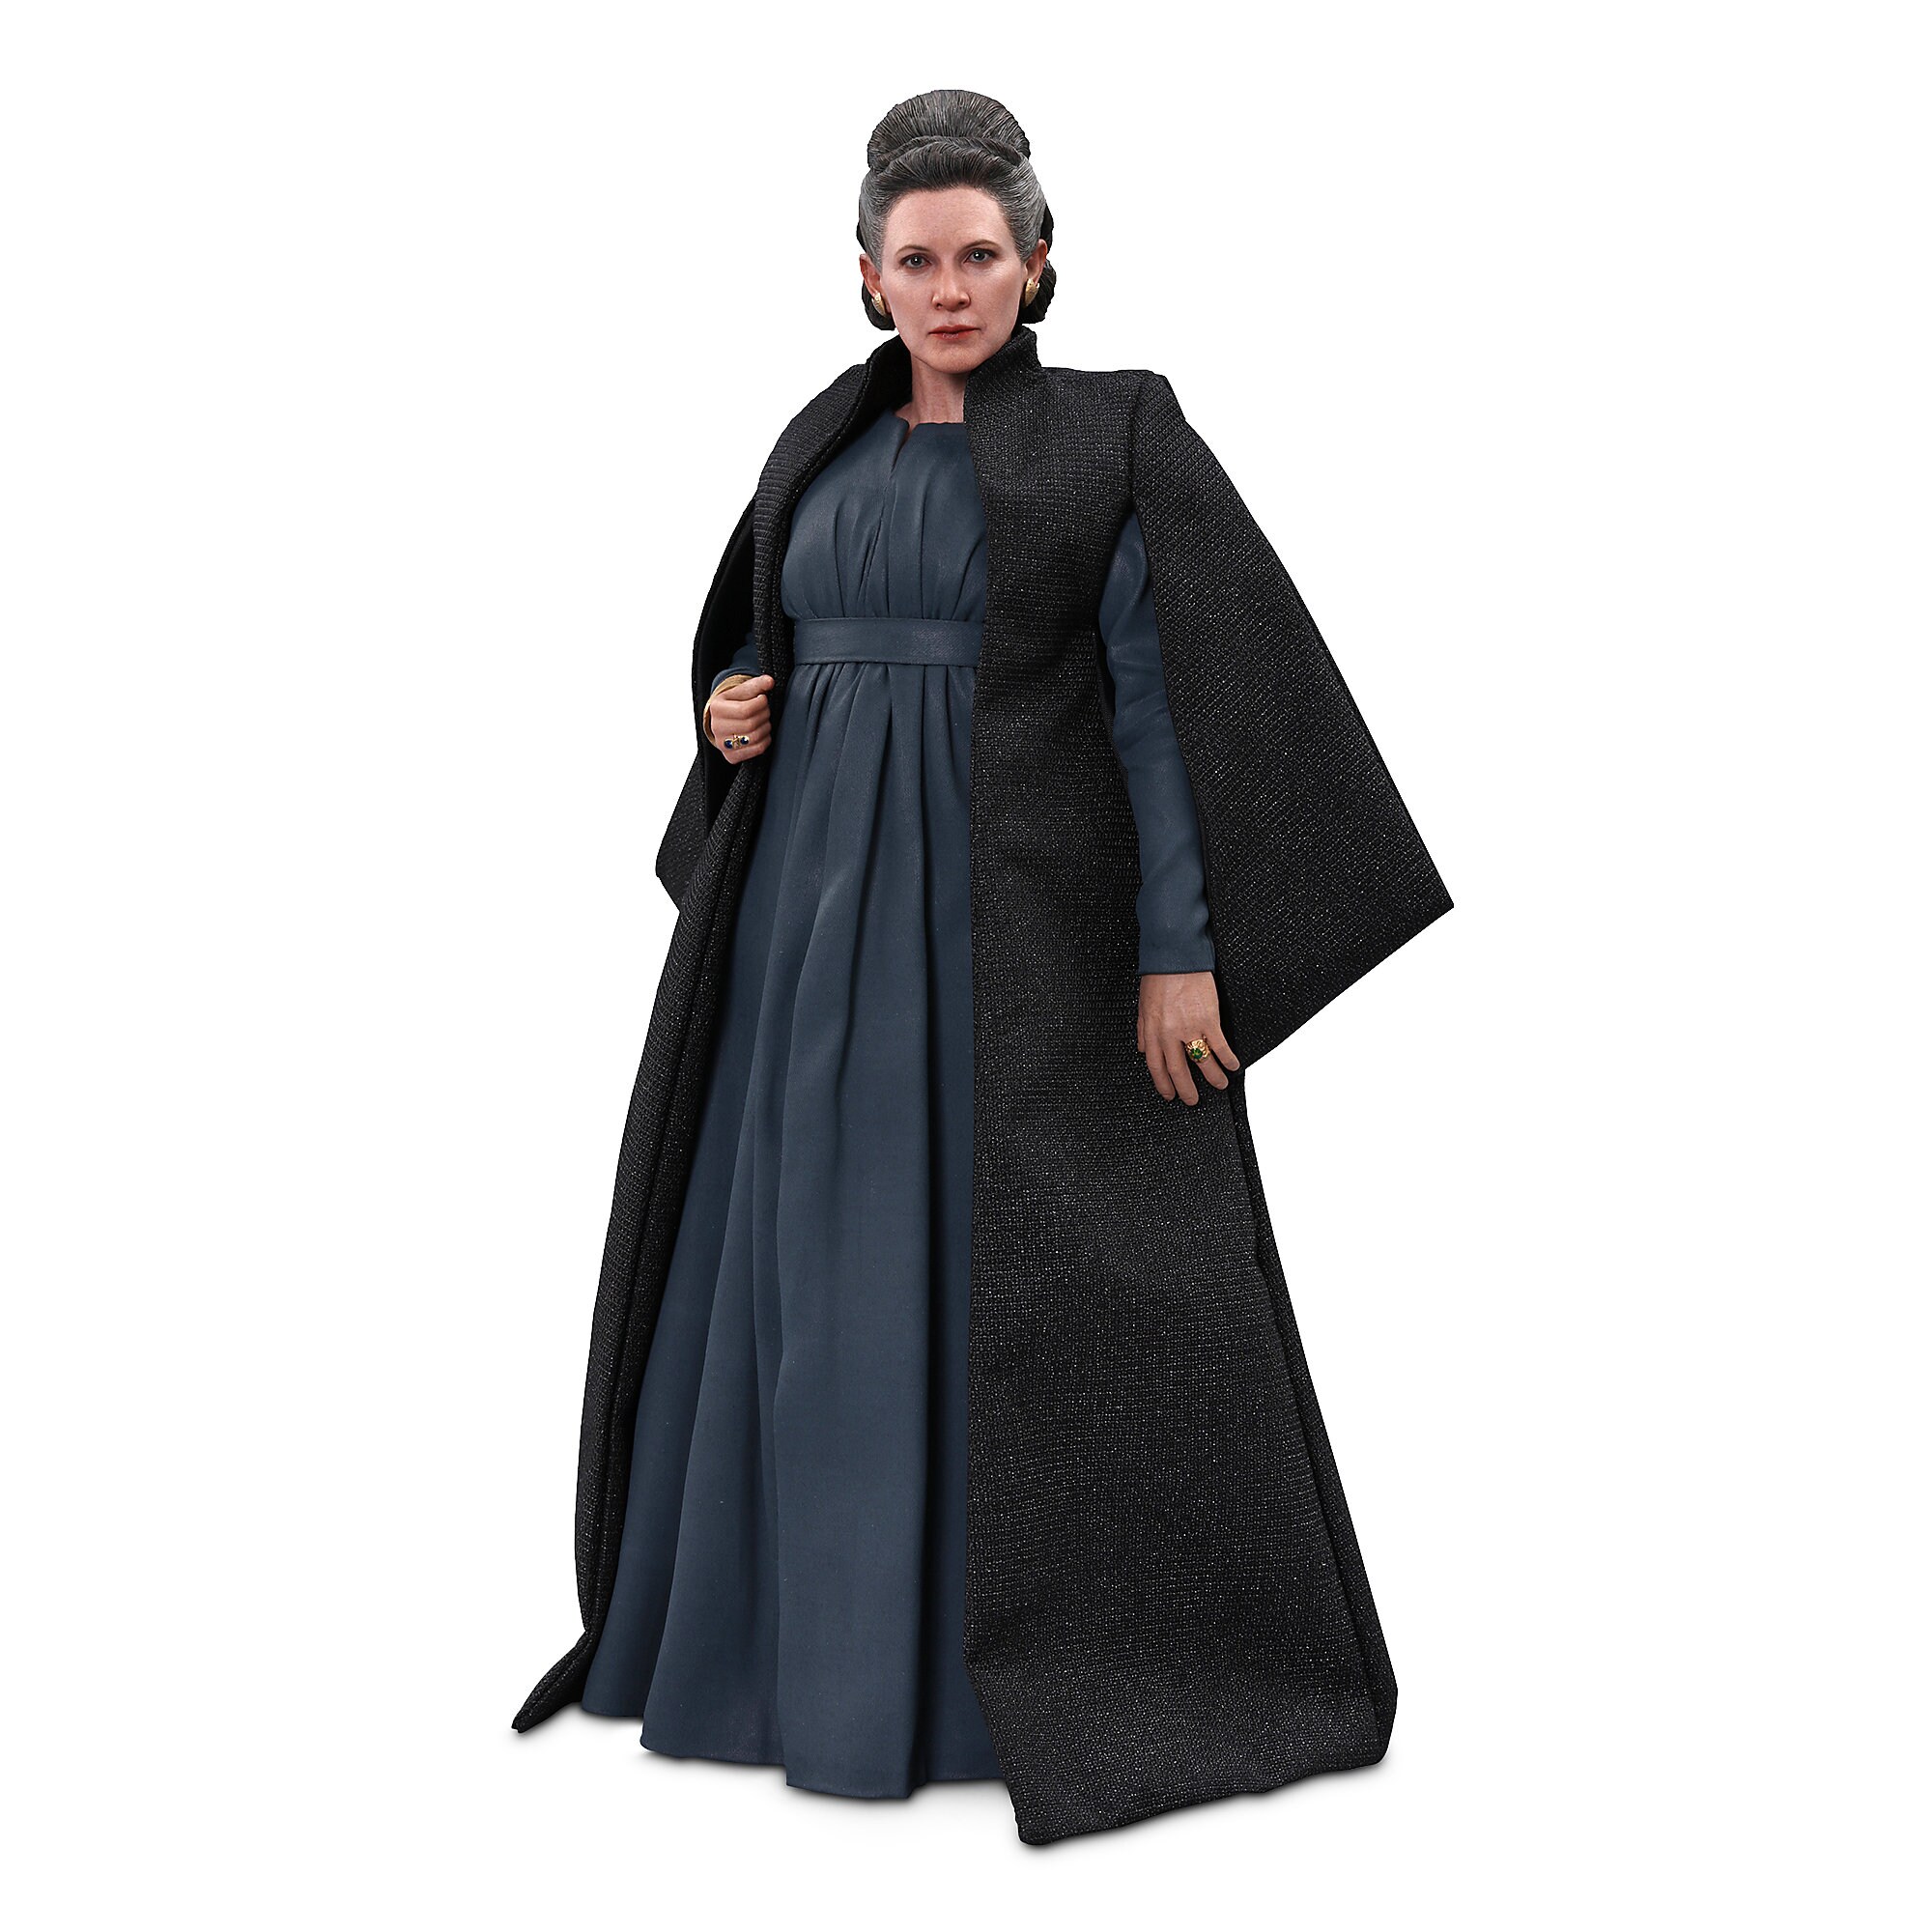 Leia Organa Sixth Scale Figure by Sideshow Collectibles